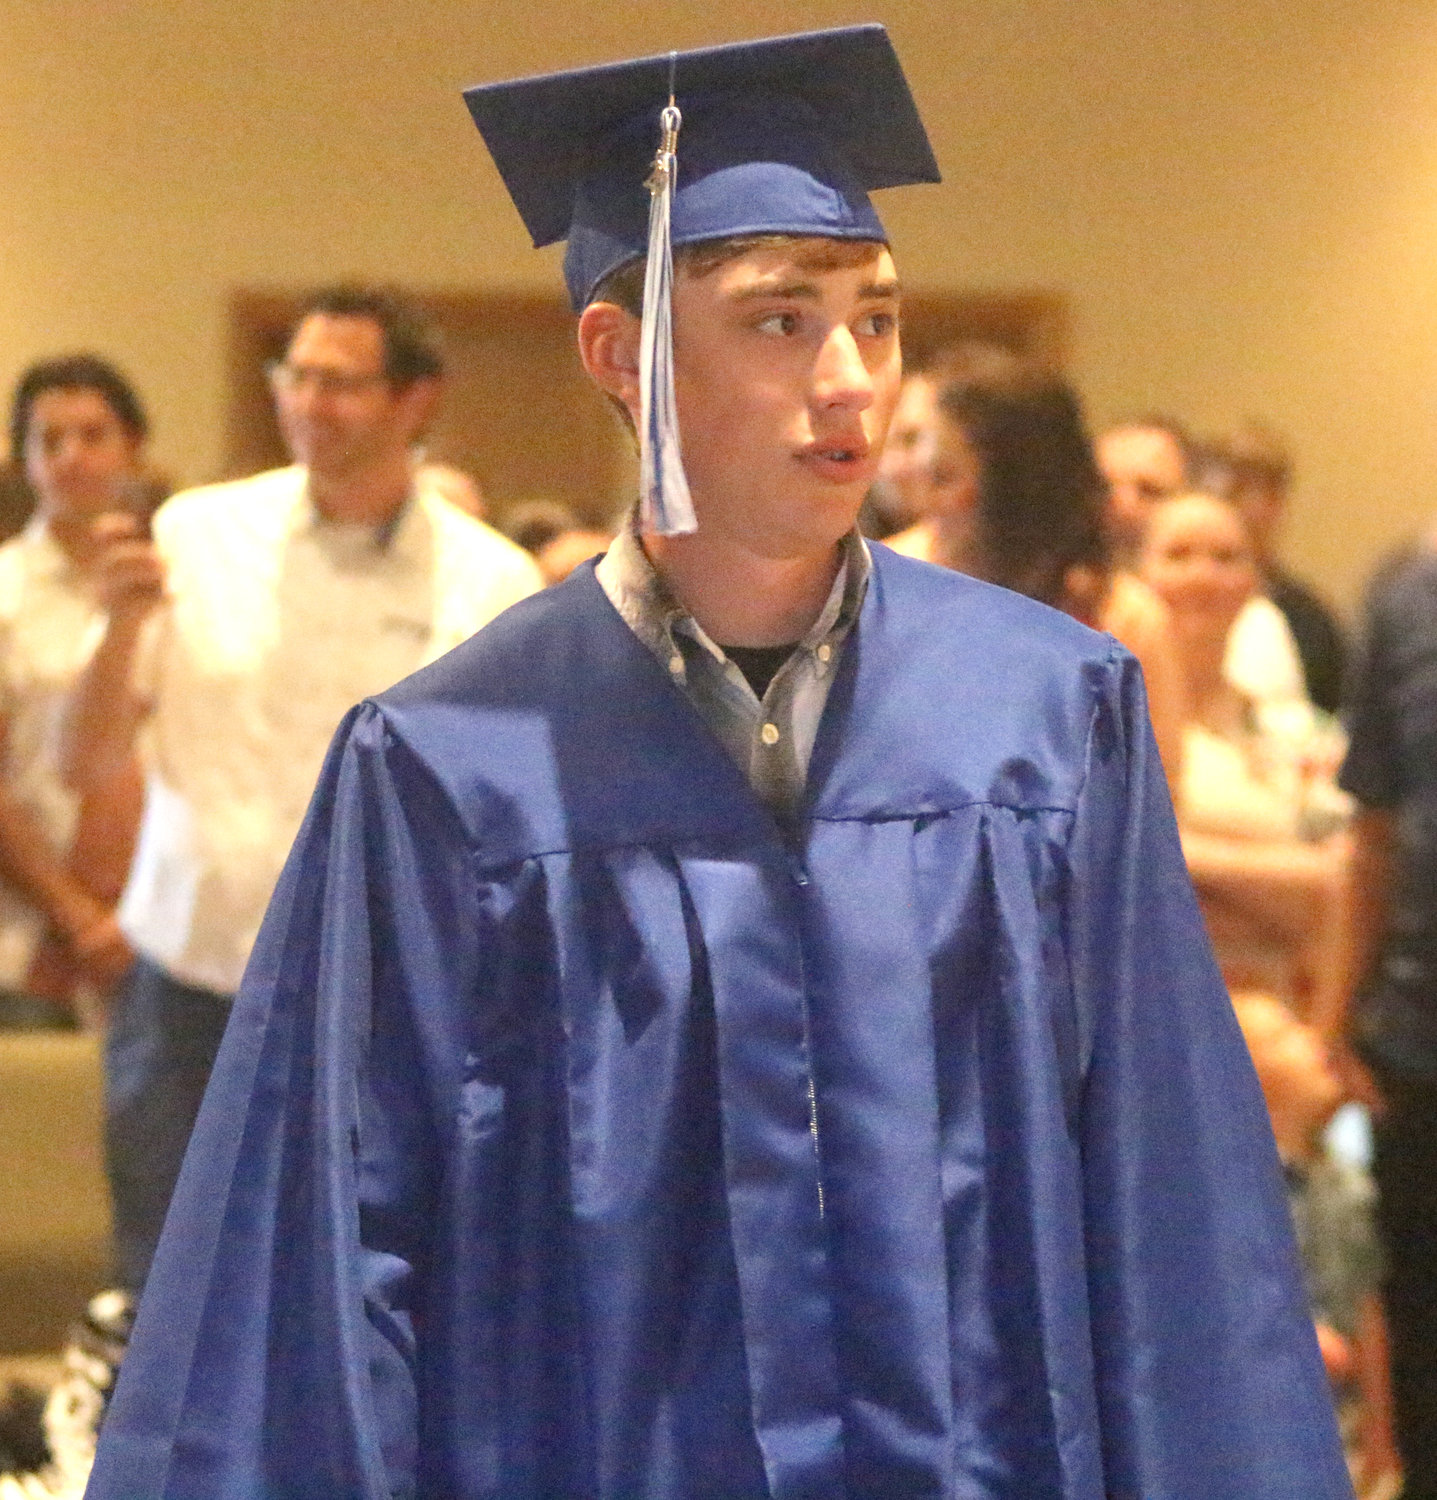 Logan Stutzman marches down the aisle at the start of the ceremony.